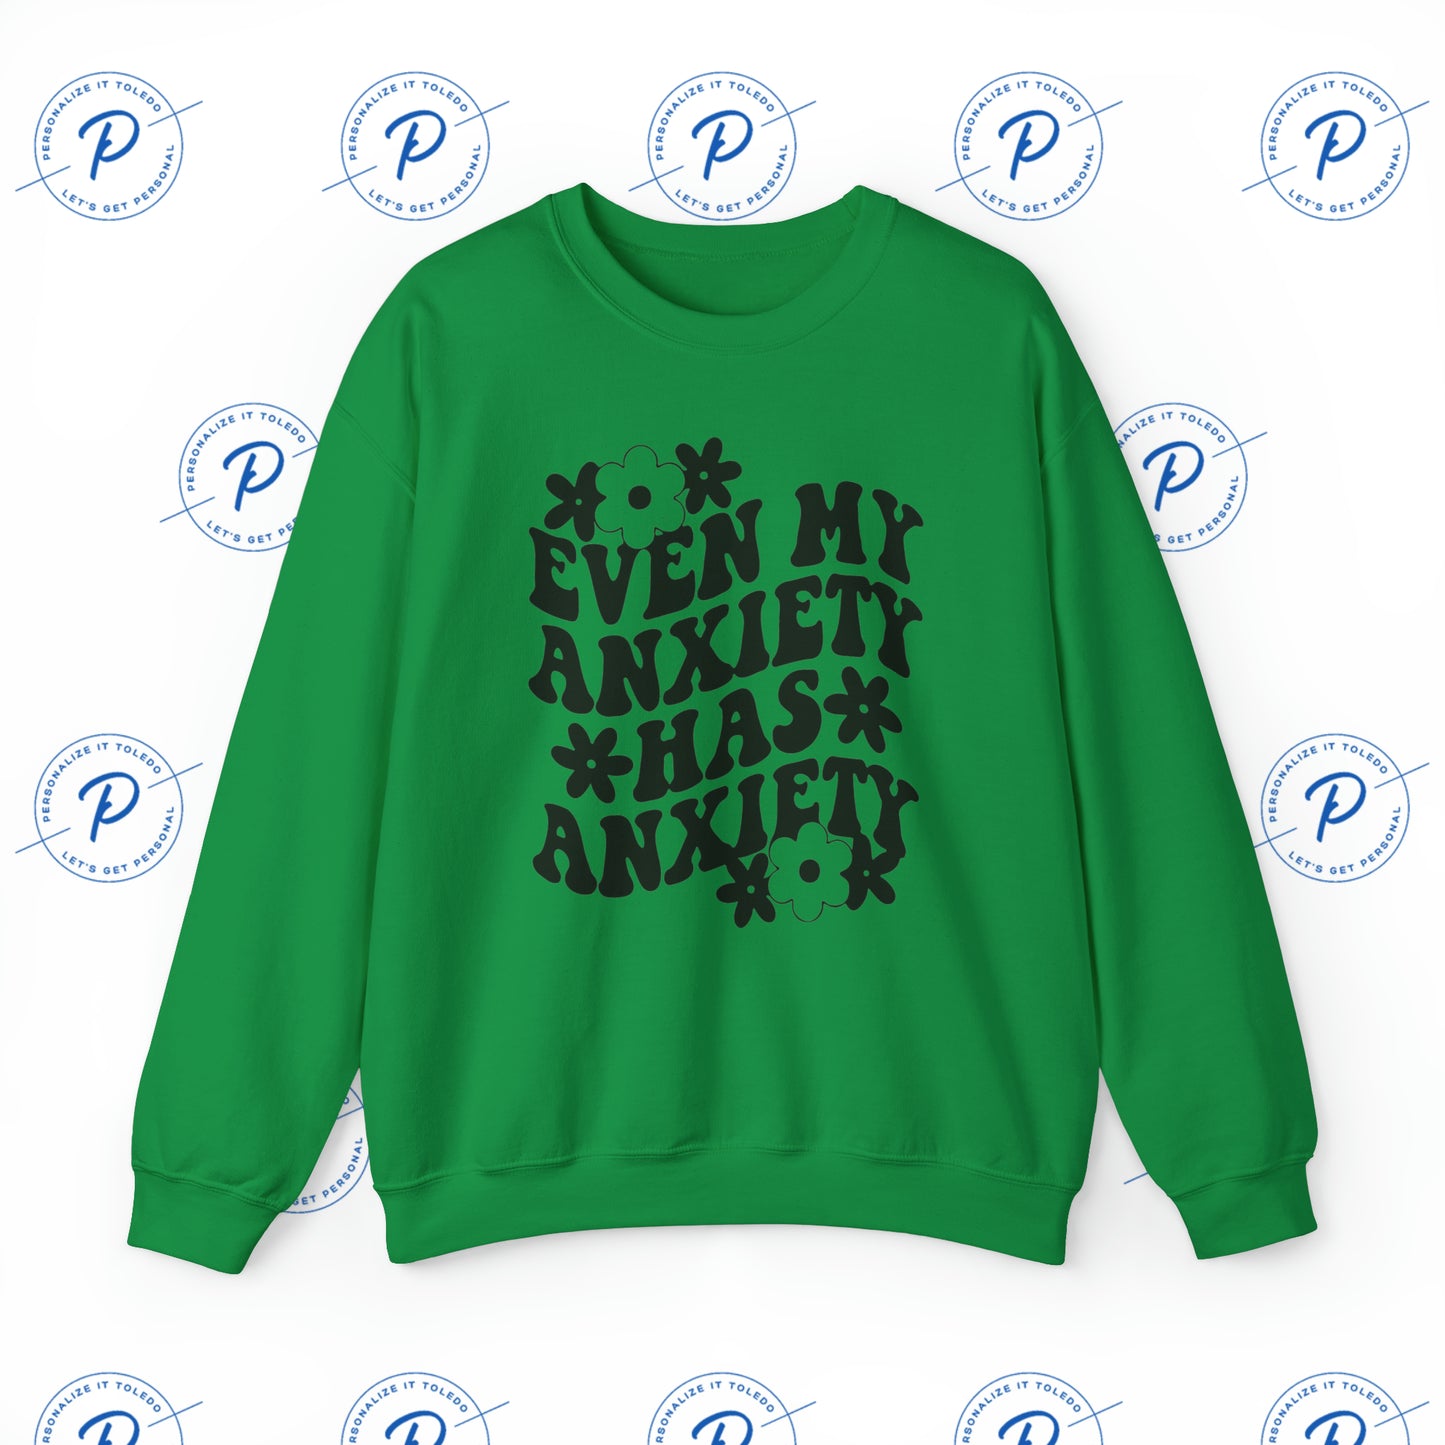 Even My Anxiety Has Anxiety Retro Jitters Cozy Blend Sweatshirt - Funny Apparel For Her